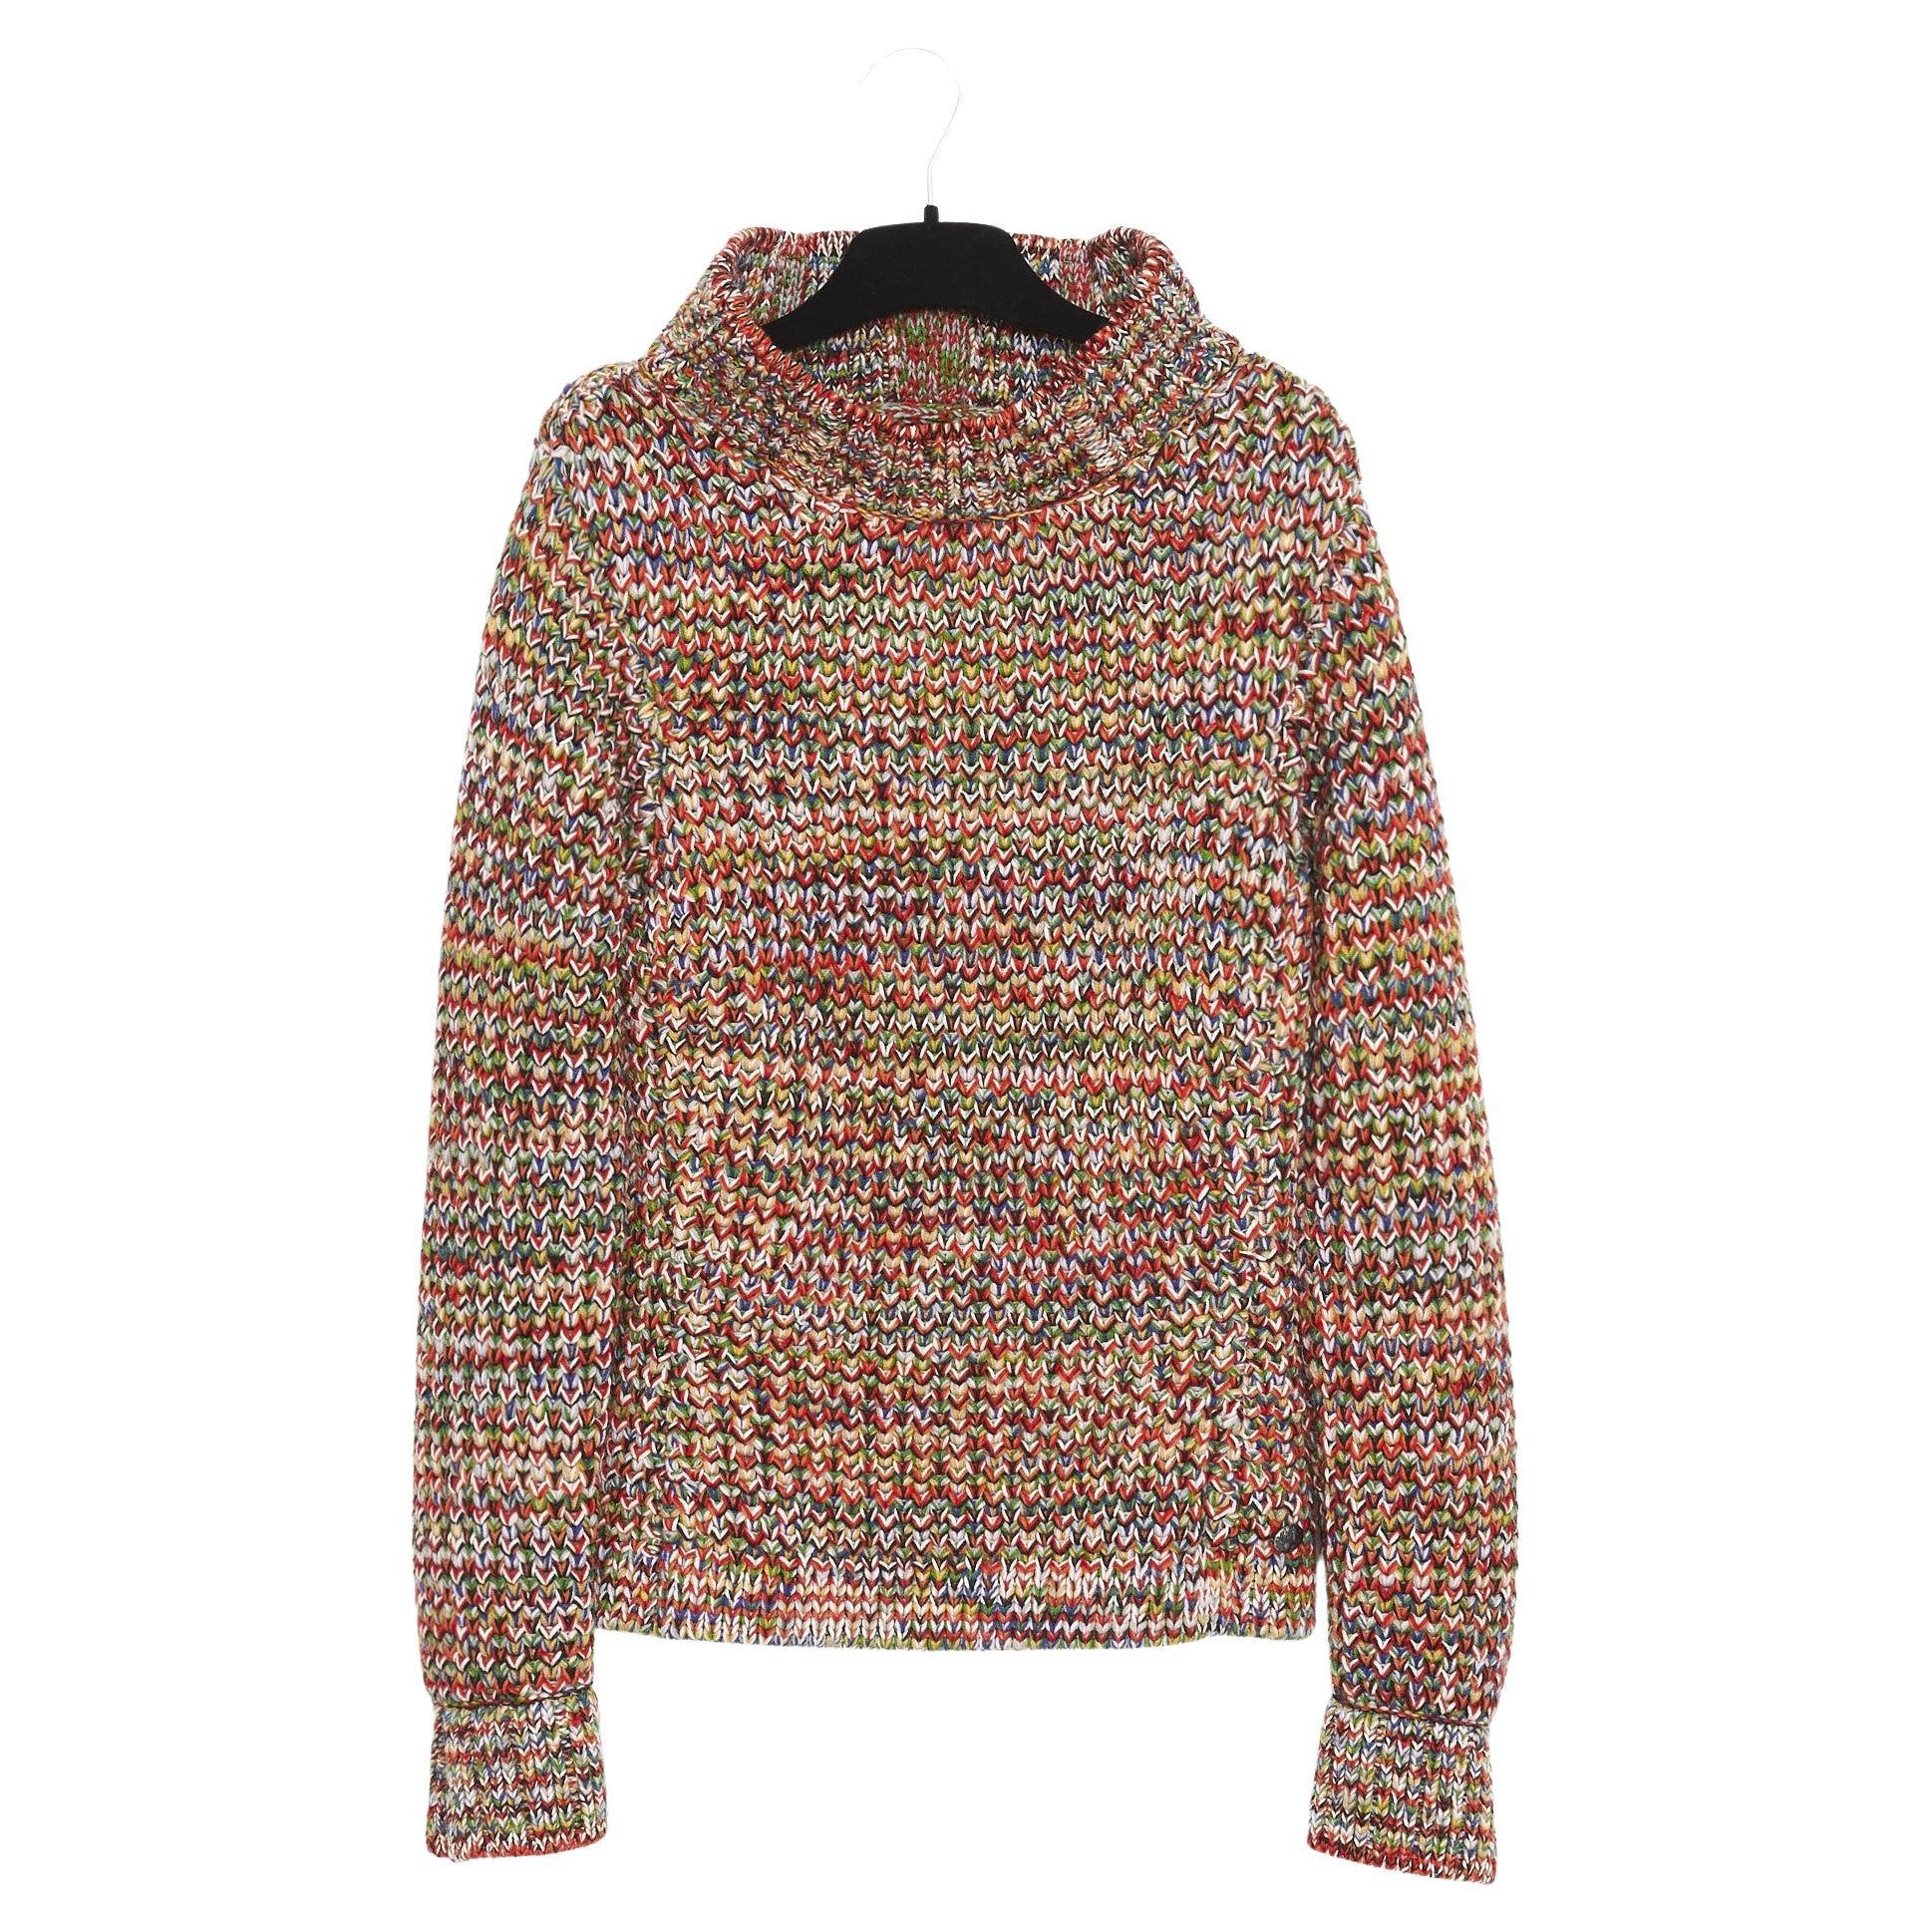 2013A Chanel Sweater FR36/38 Colorfull tweed